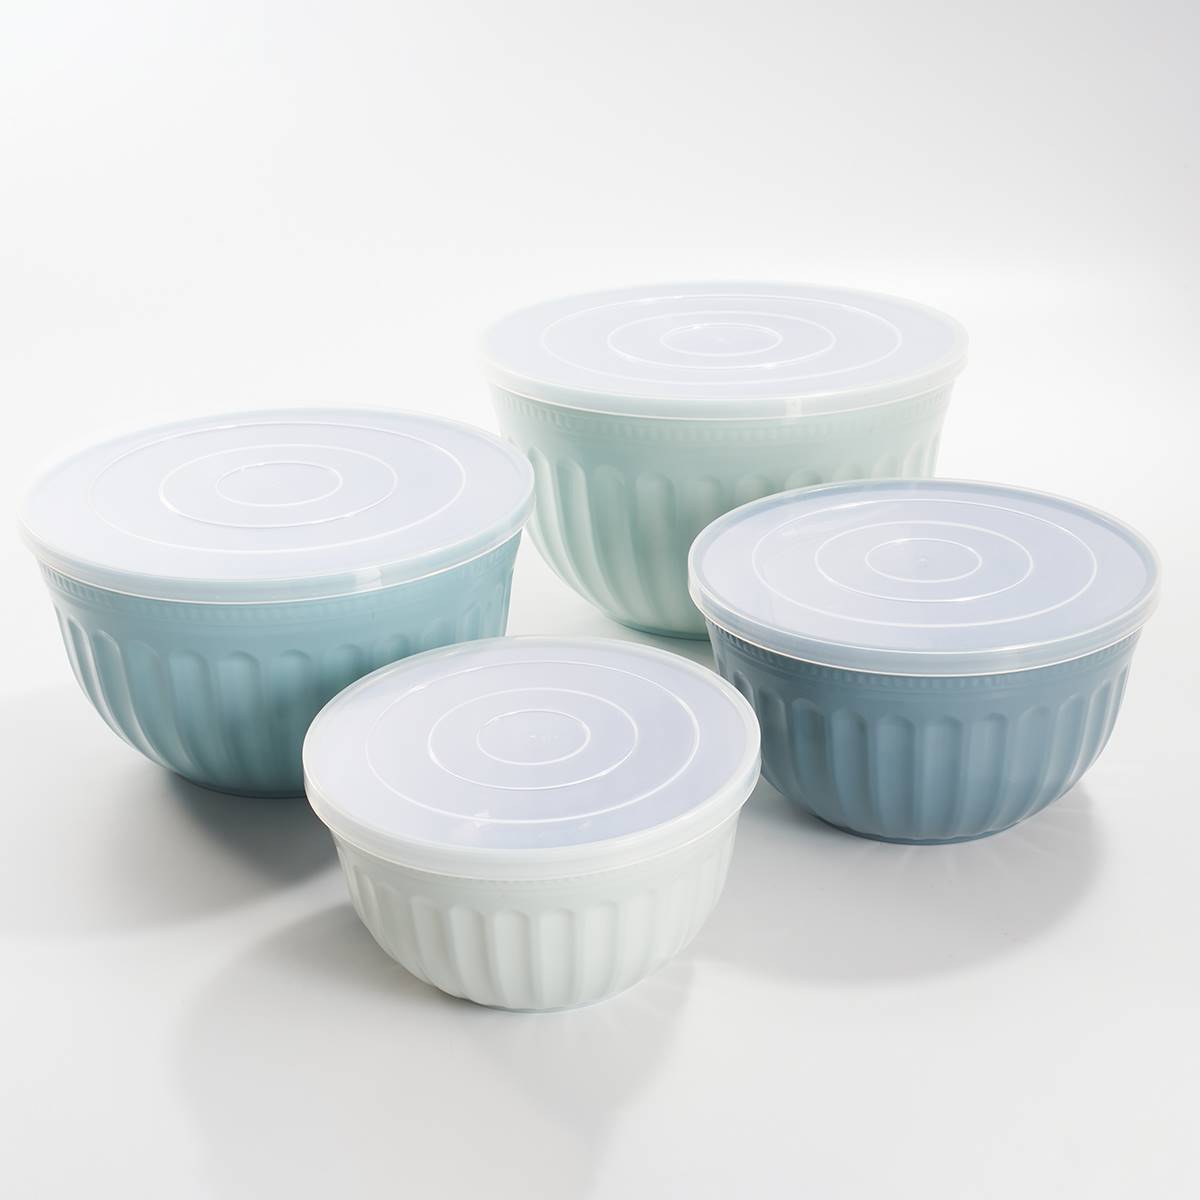 Scallop 4pc. Mixing Bowls With Lids - Blue Ombre